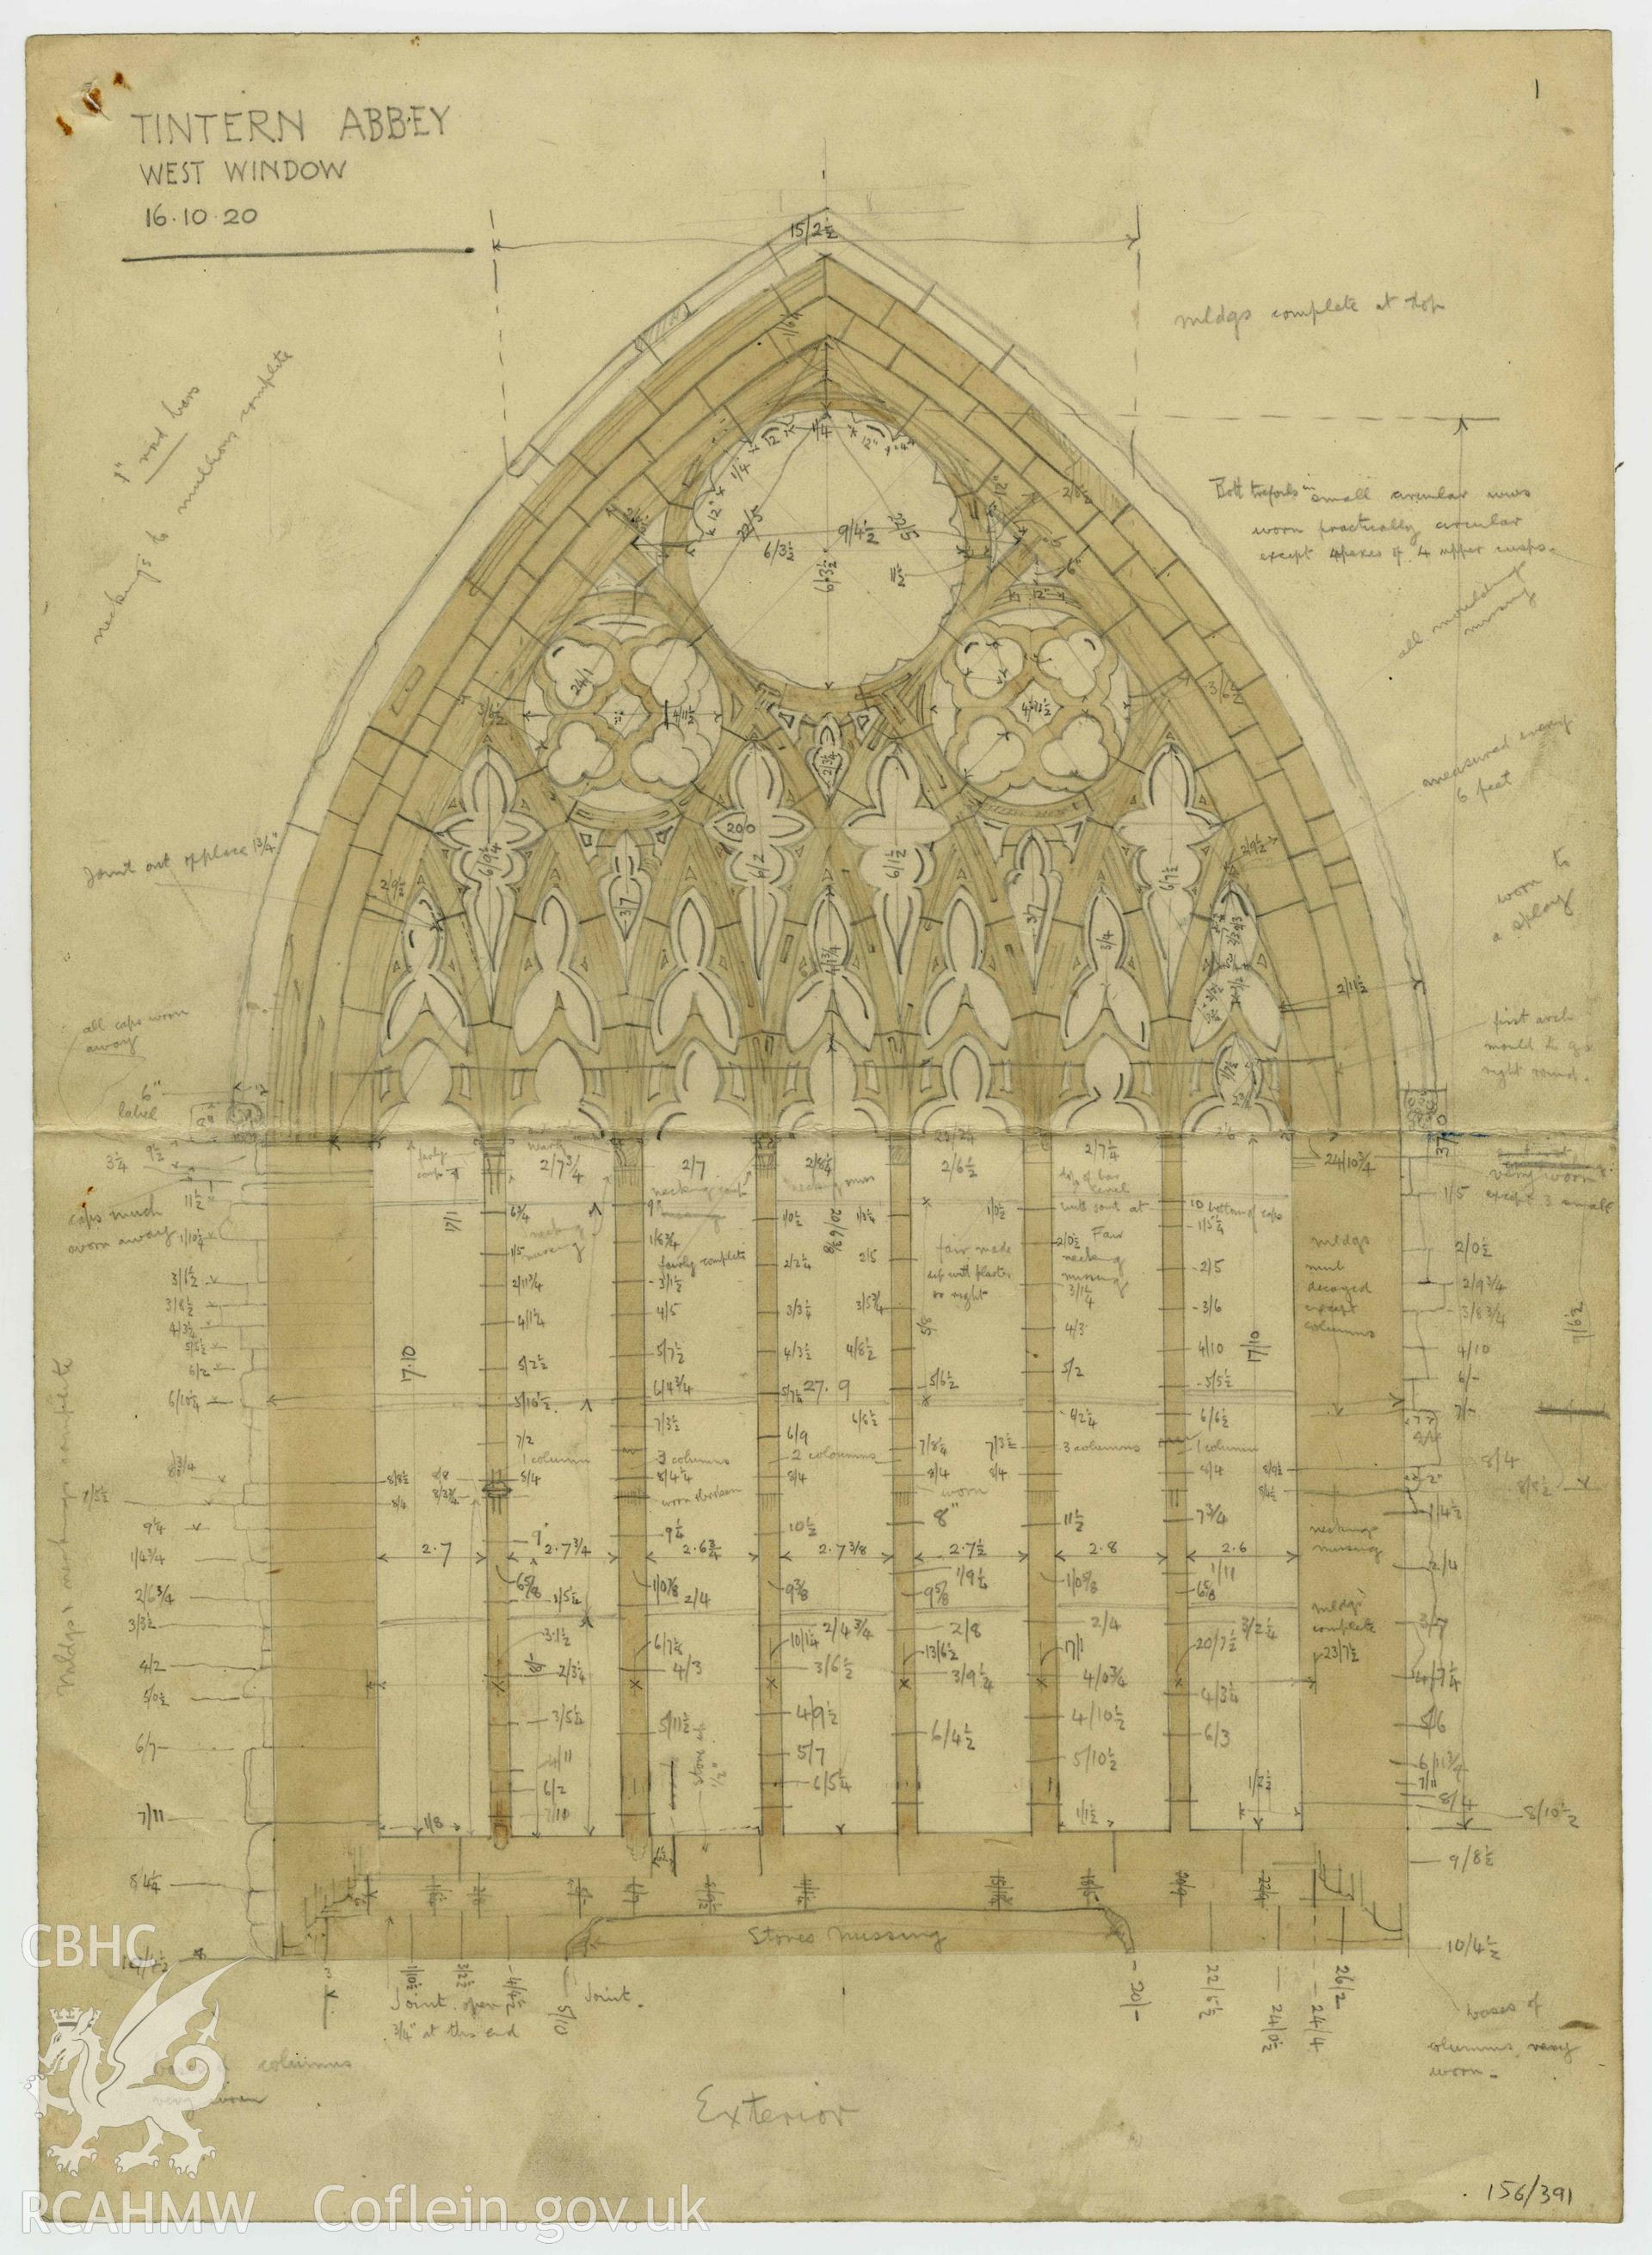 Cadw guardianship monument drawing, colour-wash measured drawing of exterior of west window, with incomplete pencil sketch of interior on reverse, Tintern Abbey.  Dated 16th October 1920.